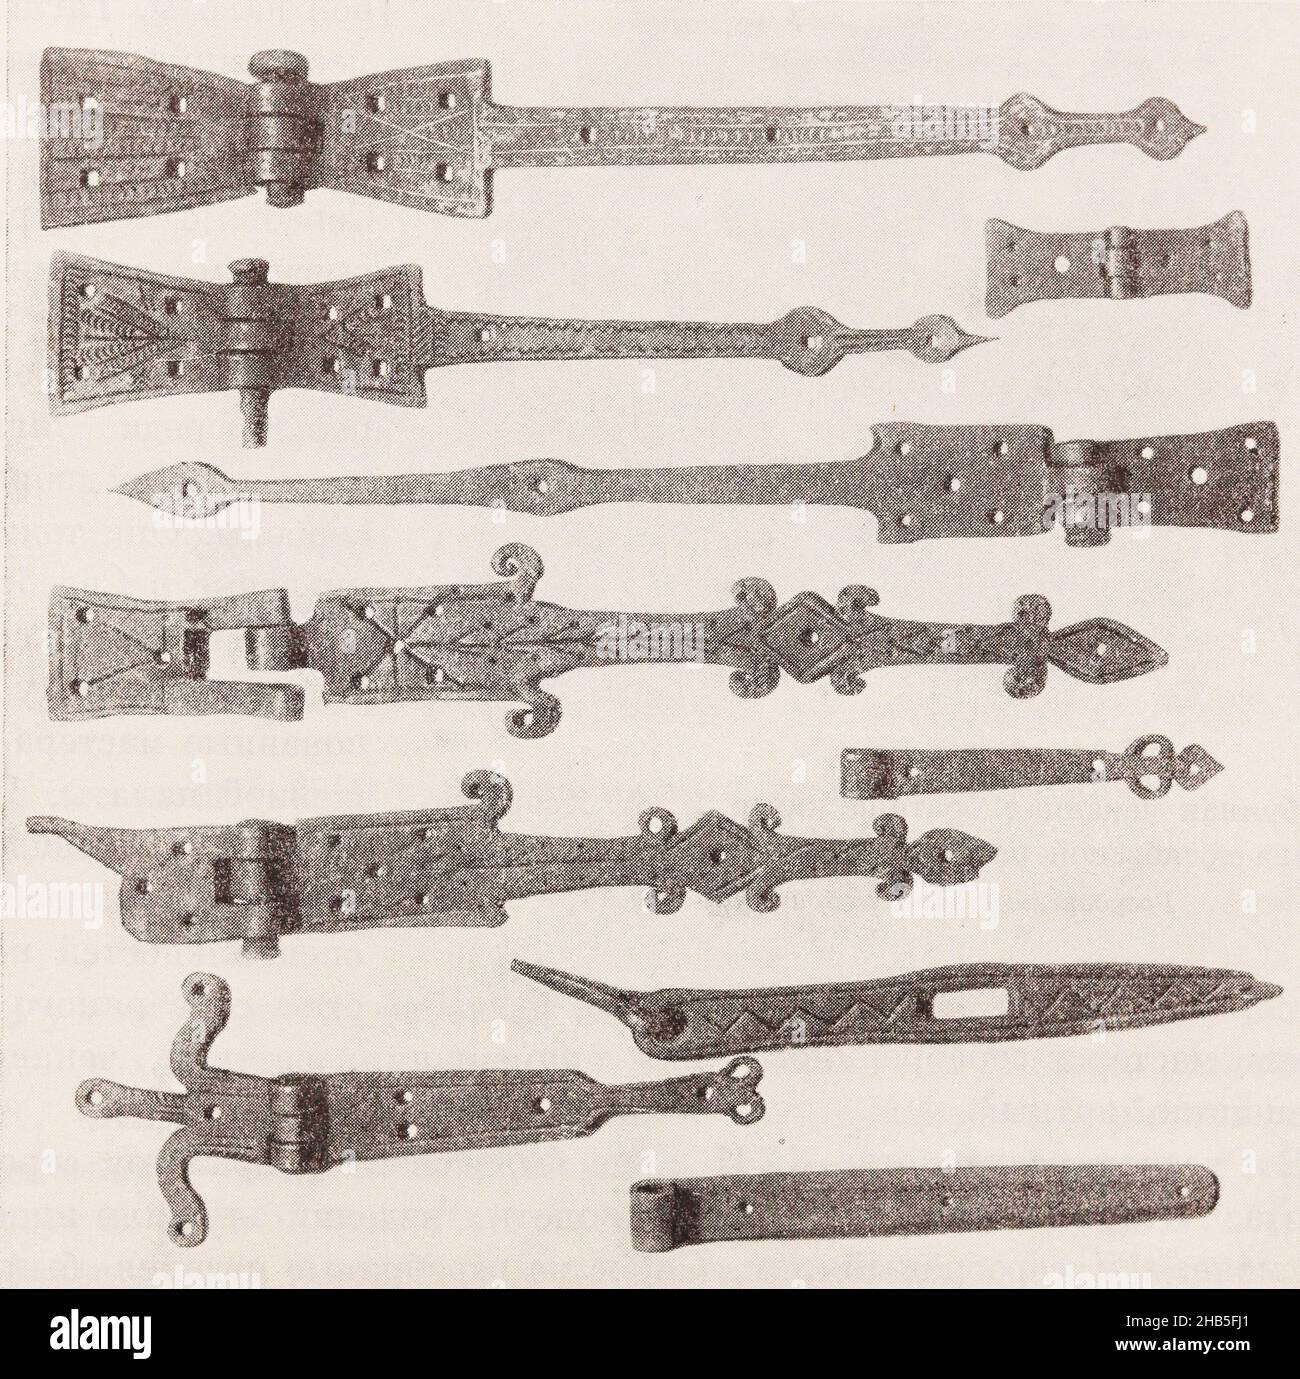 Image of the 17th century iron door hinges in Russia. Stock Photo